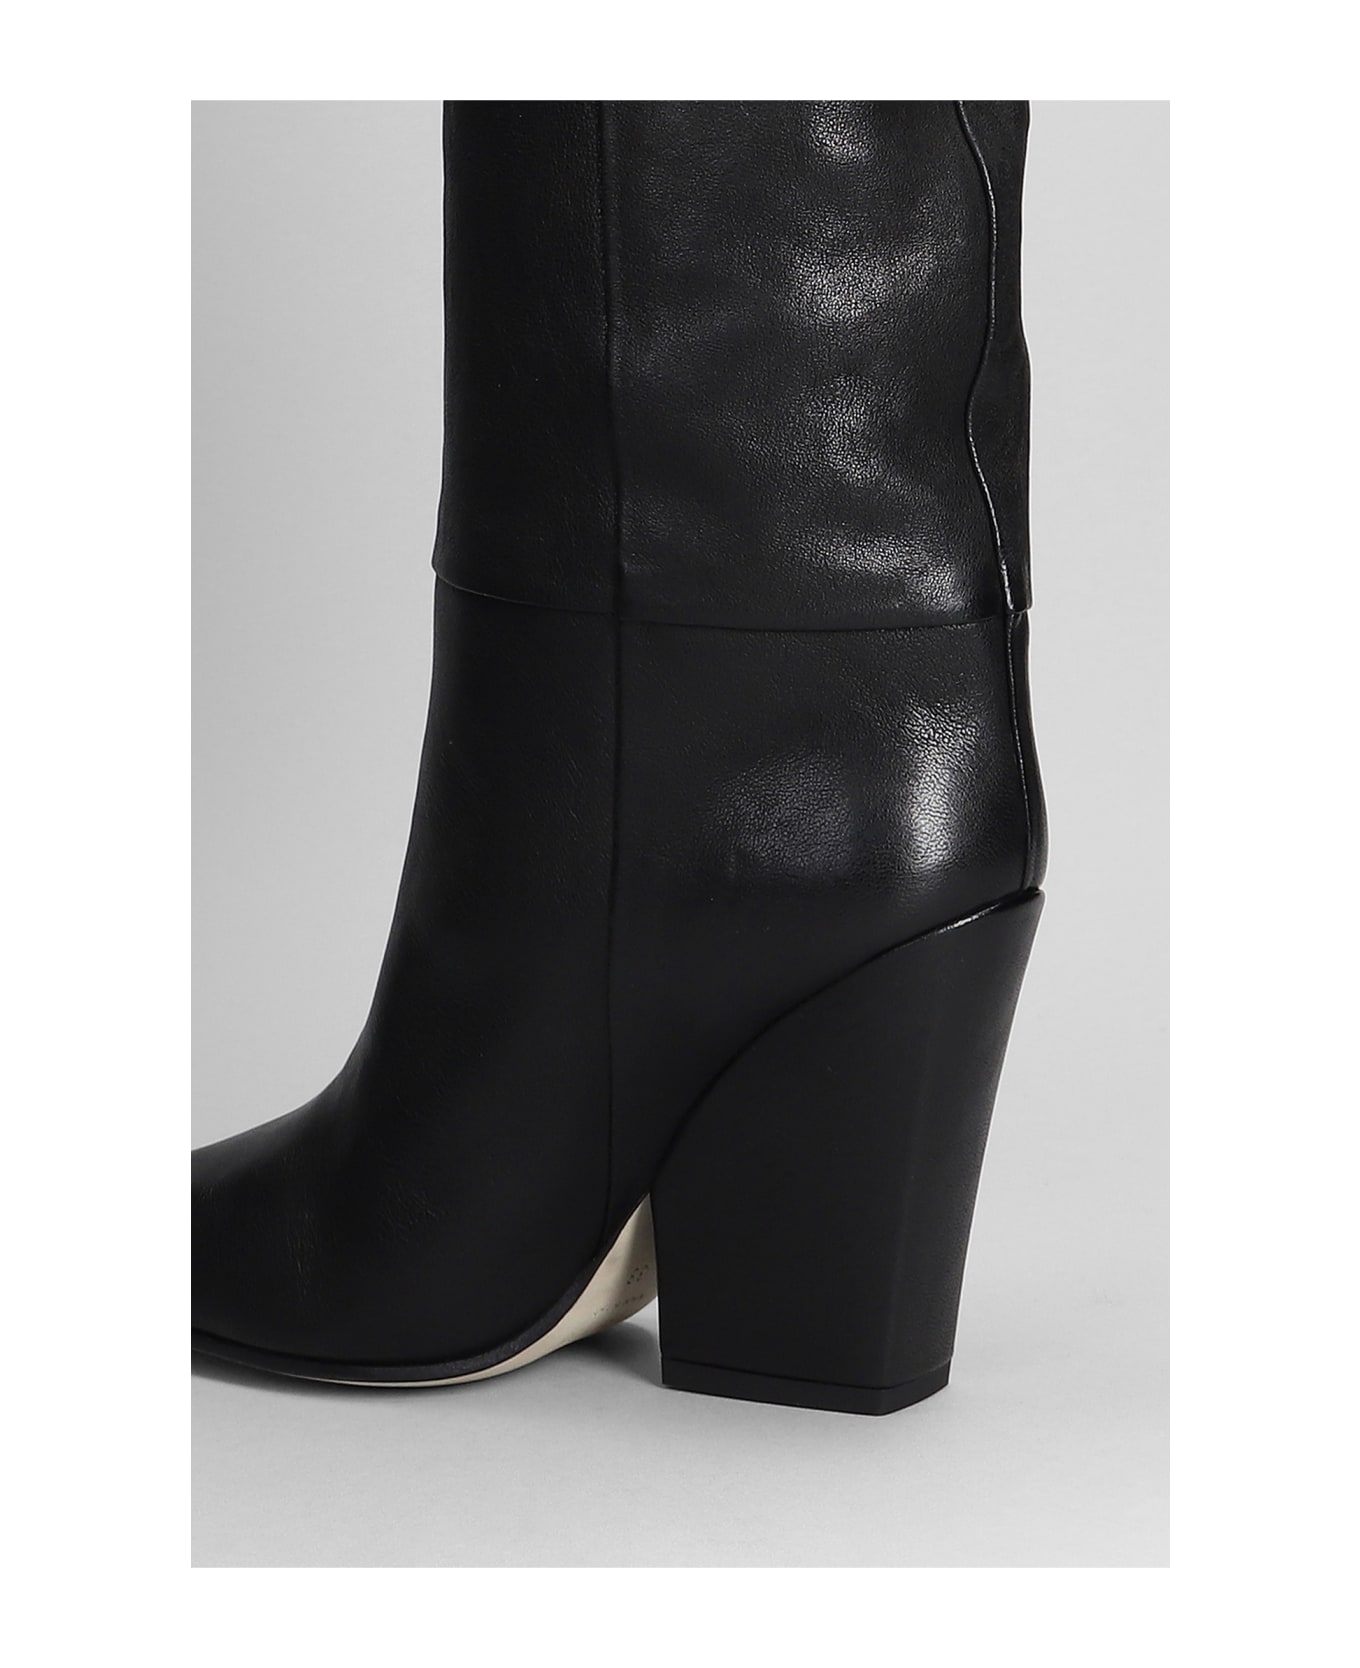 Paris Texas Jane High Heels Boots In Black Leather ブーツ